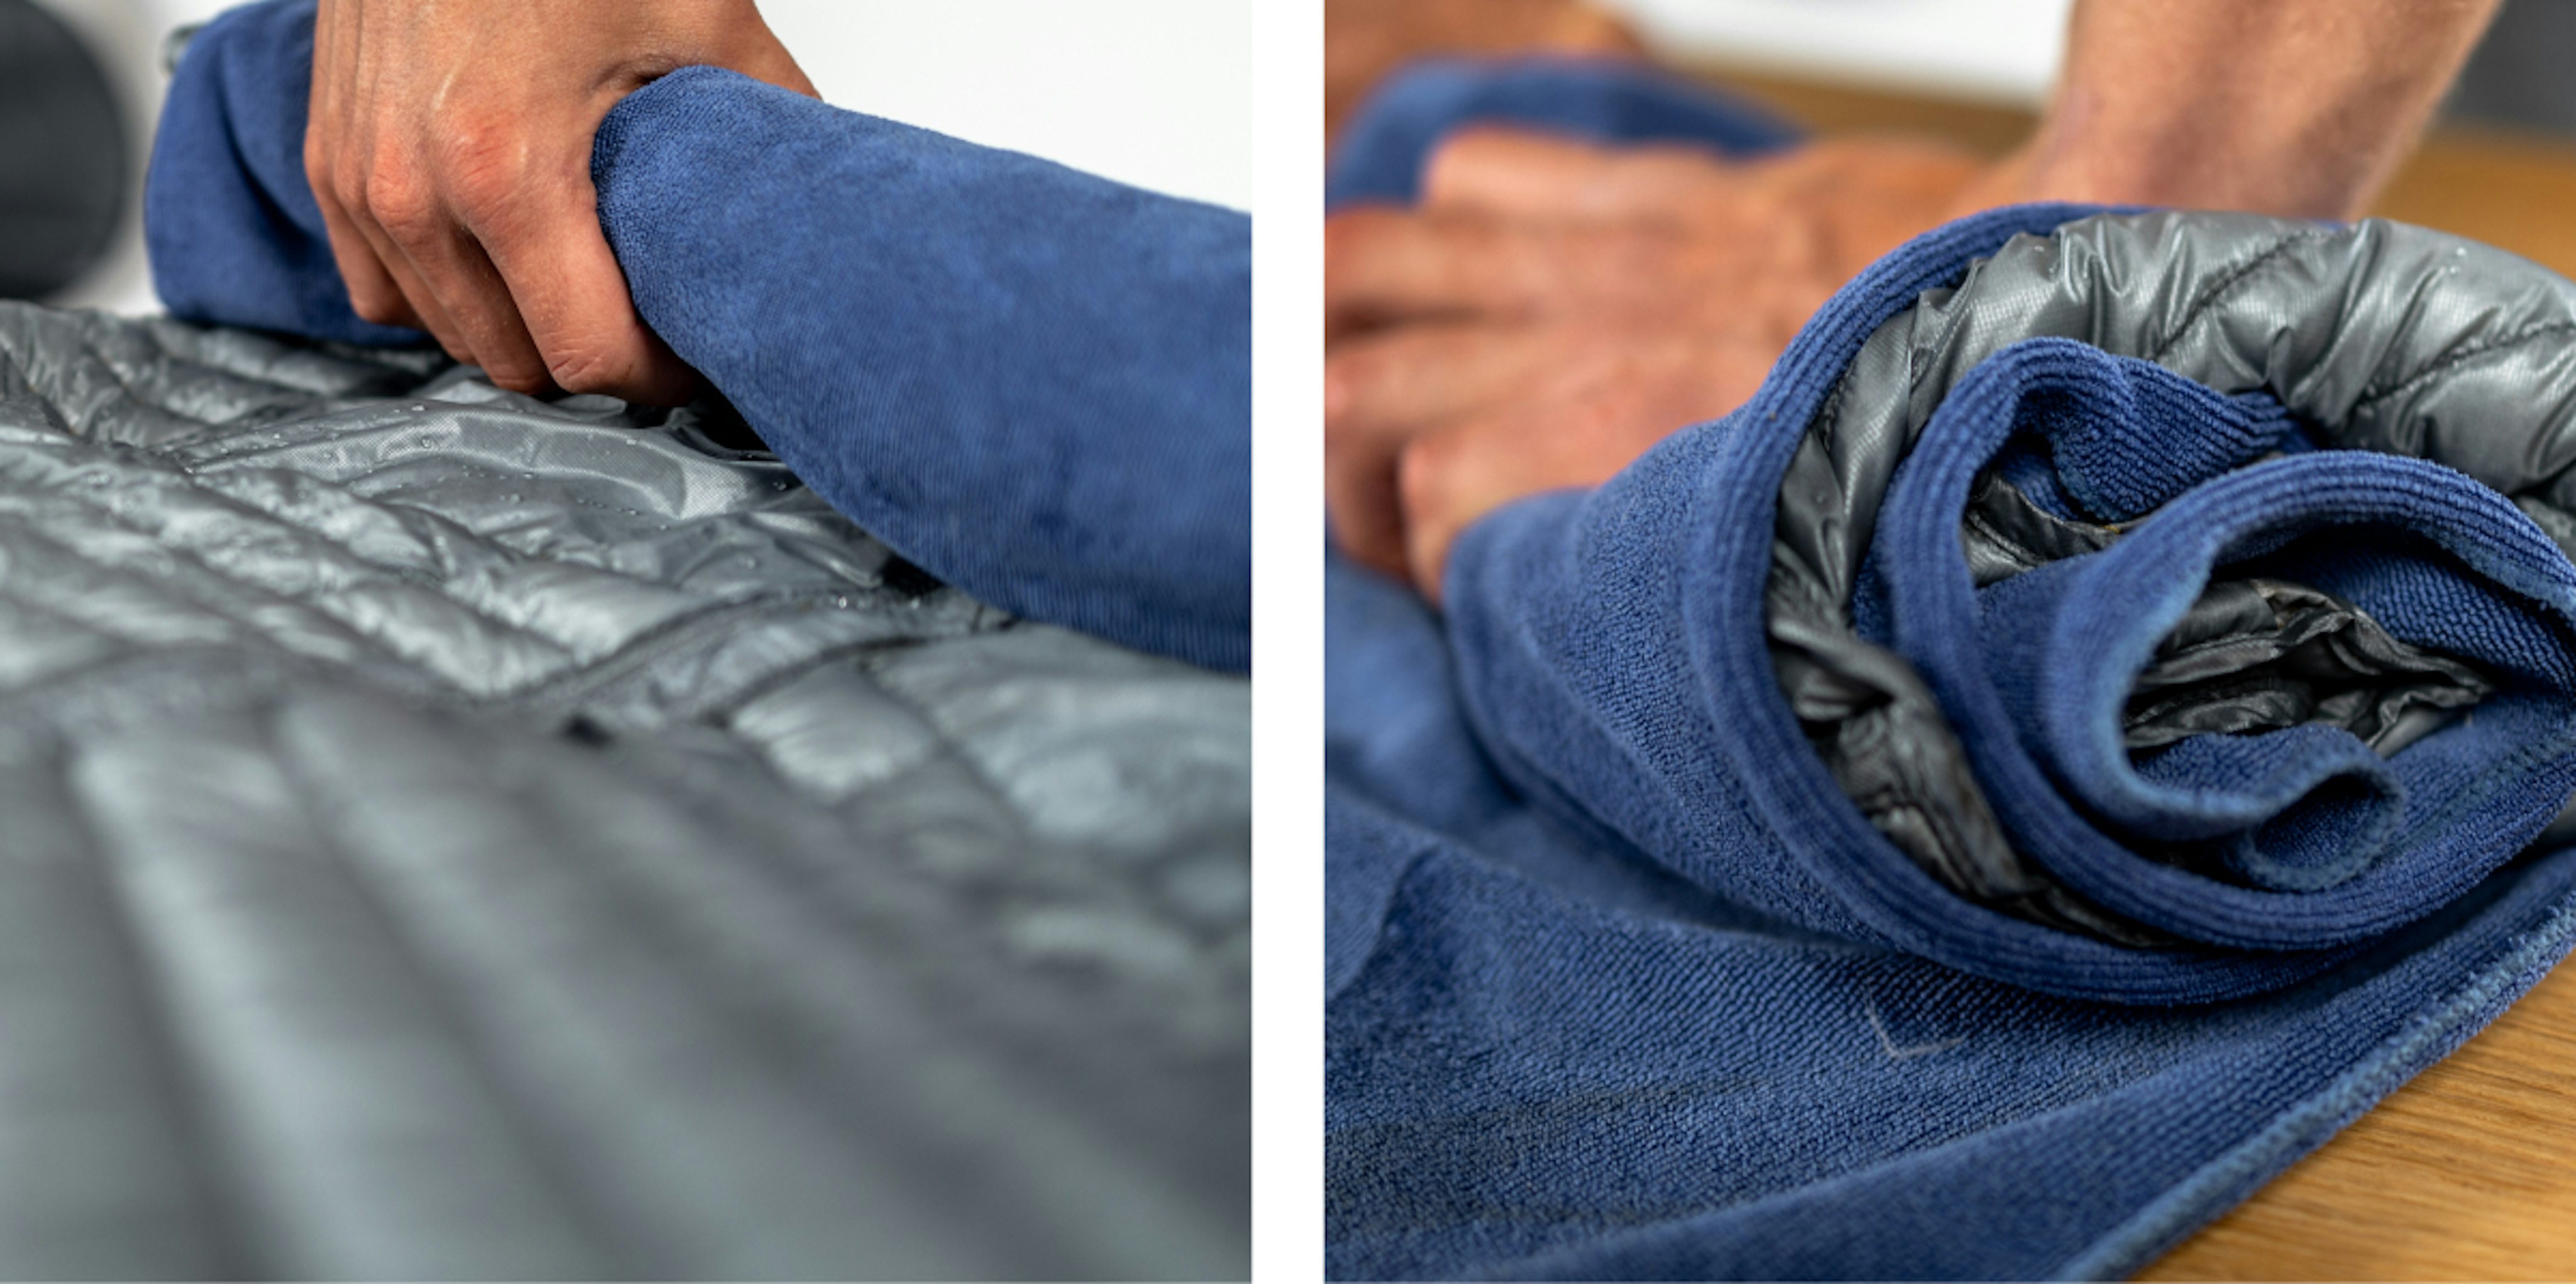 Two close-up images show hands rolling a blue Mammut towel with a gray quilted mountaineering item inside.